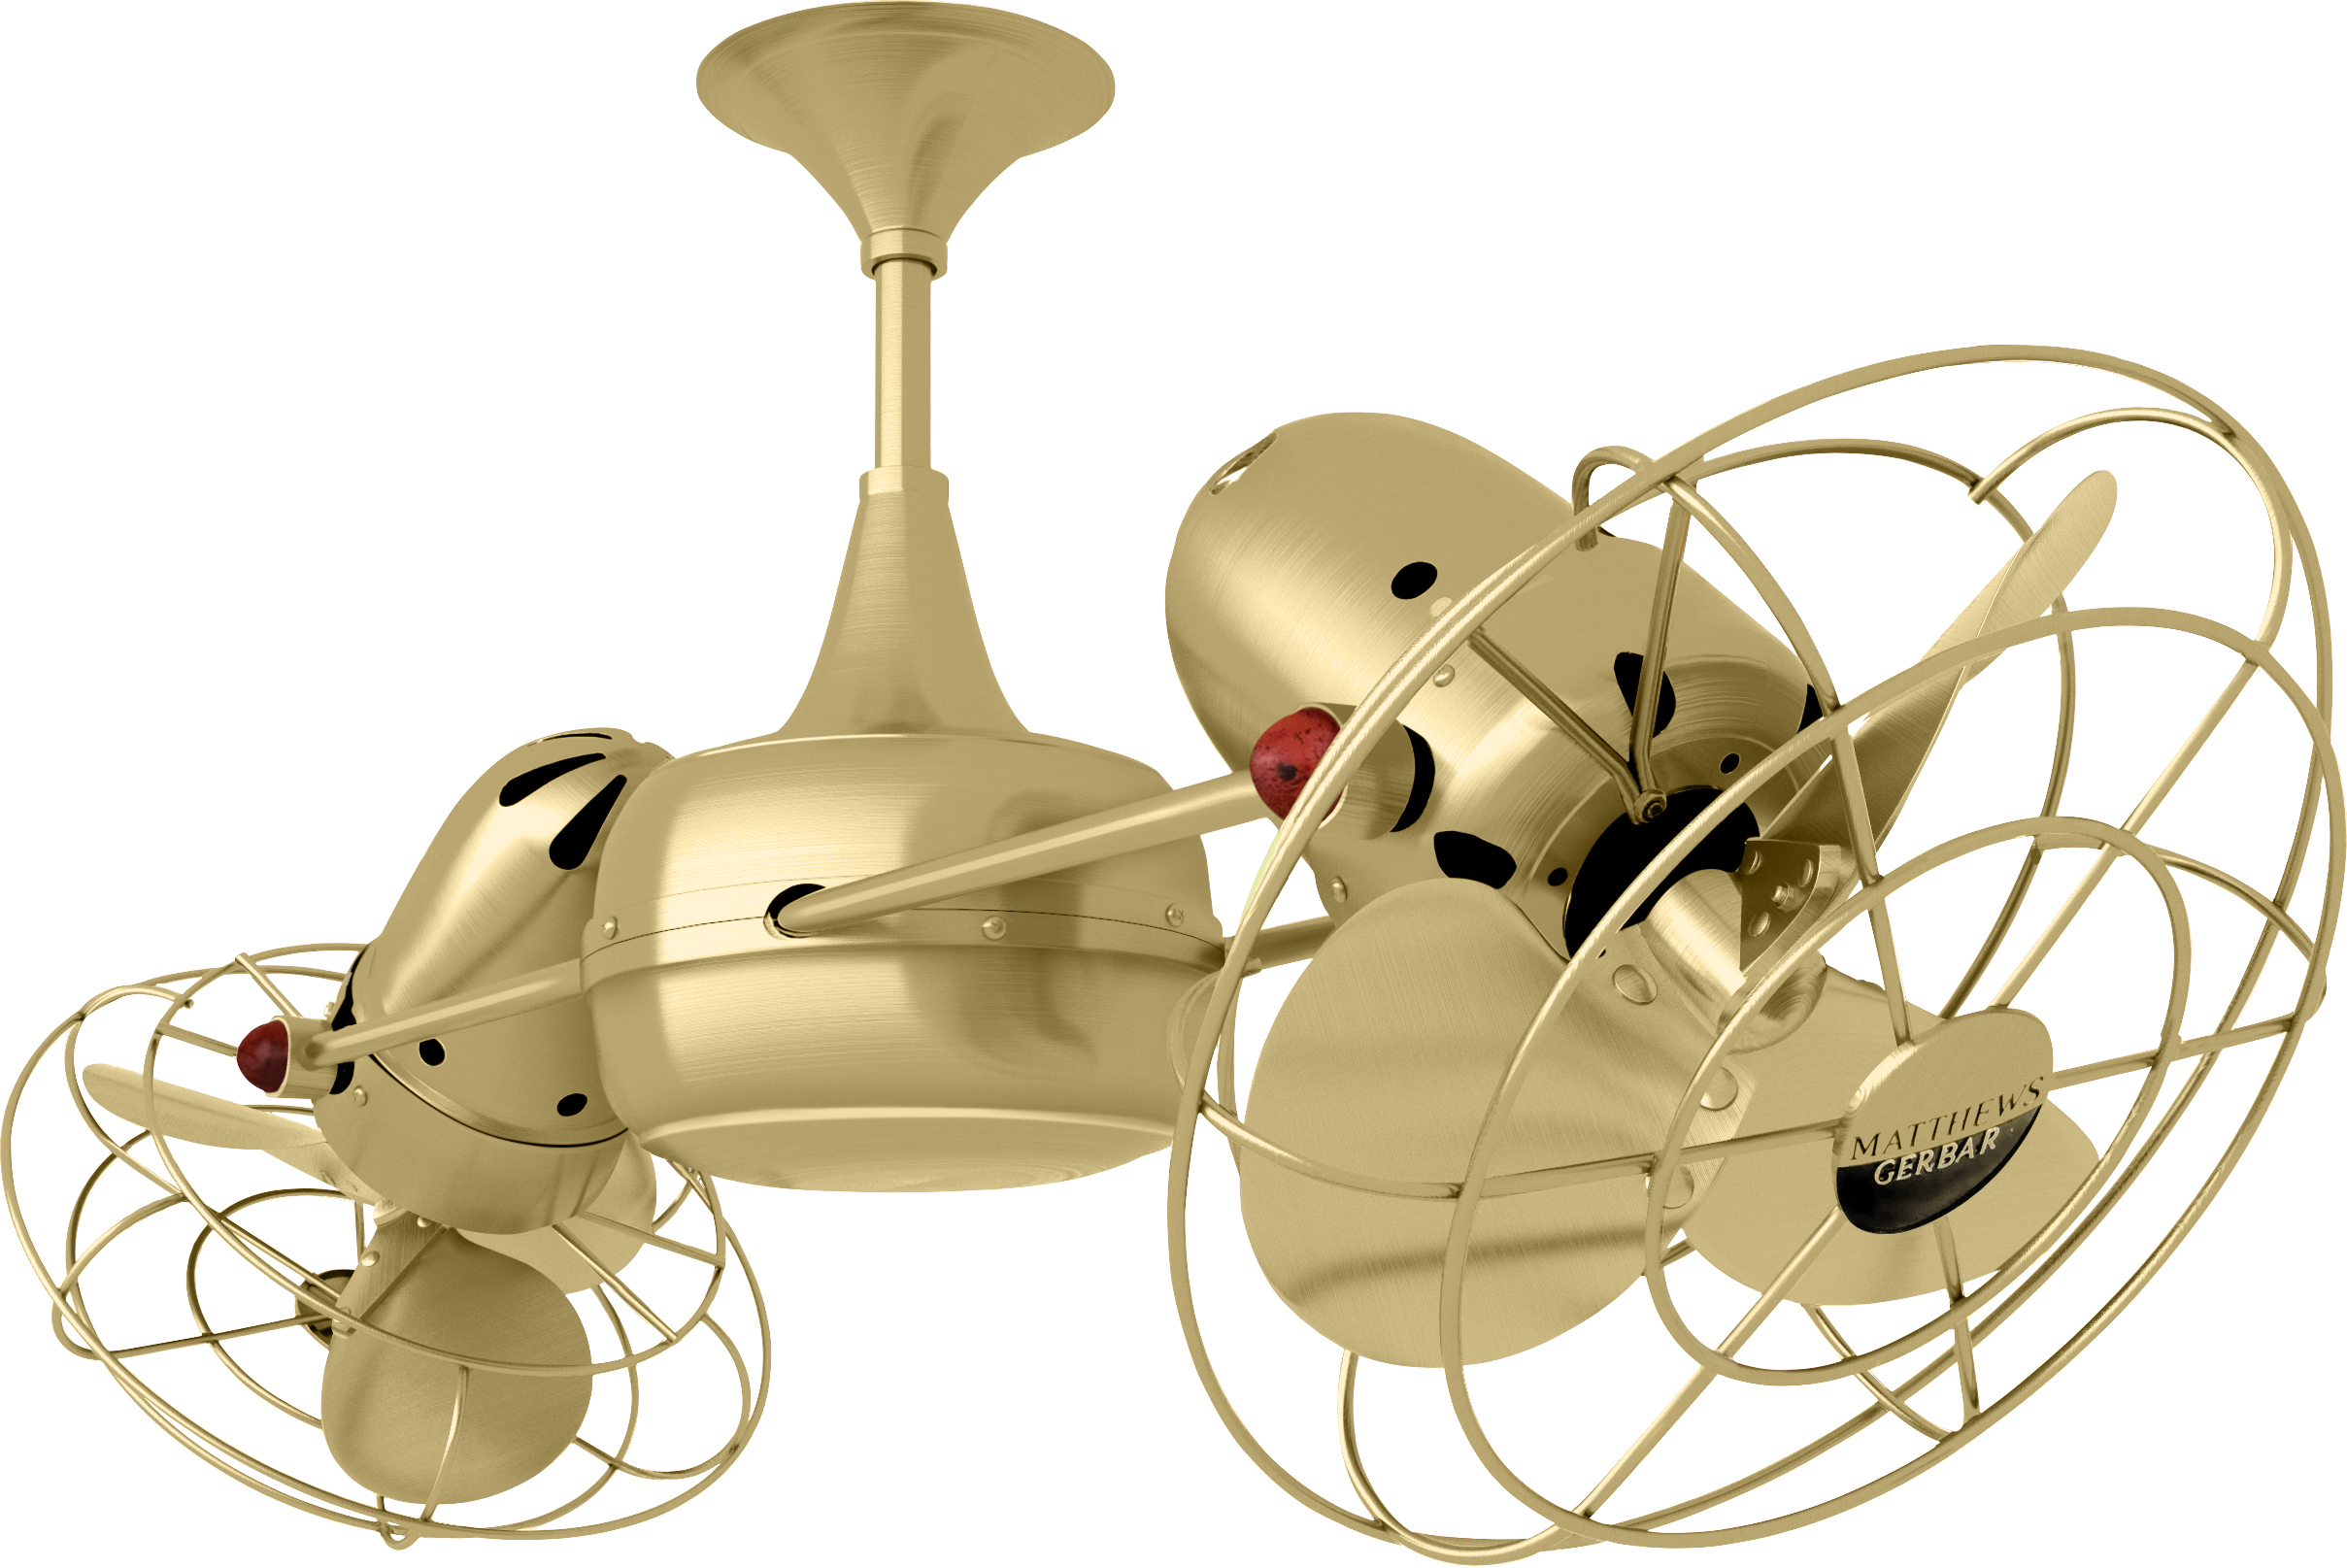 Duplo Dinamico rotational dual head ceiling fan in Brushed Brass finish with Metal blades made by Matthews Fan Company.